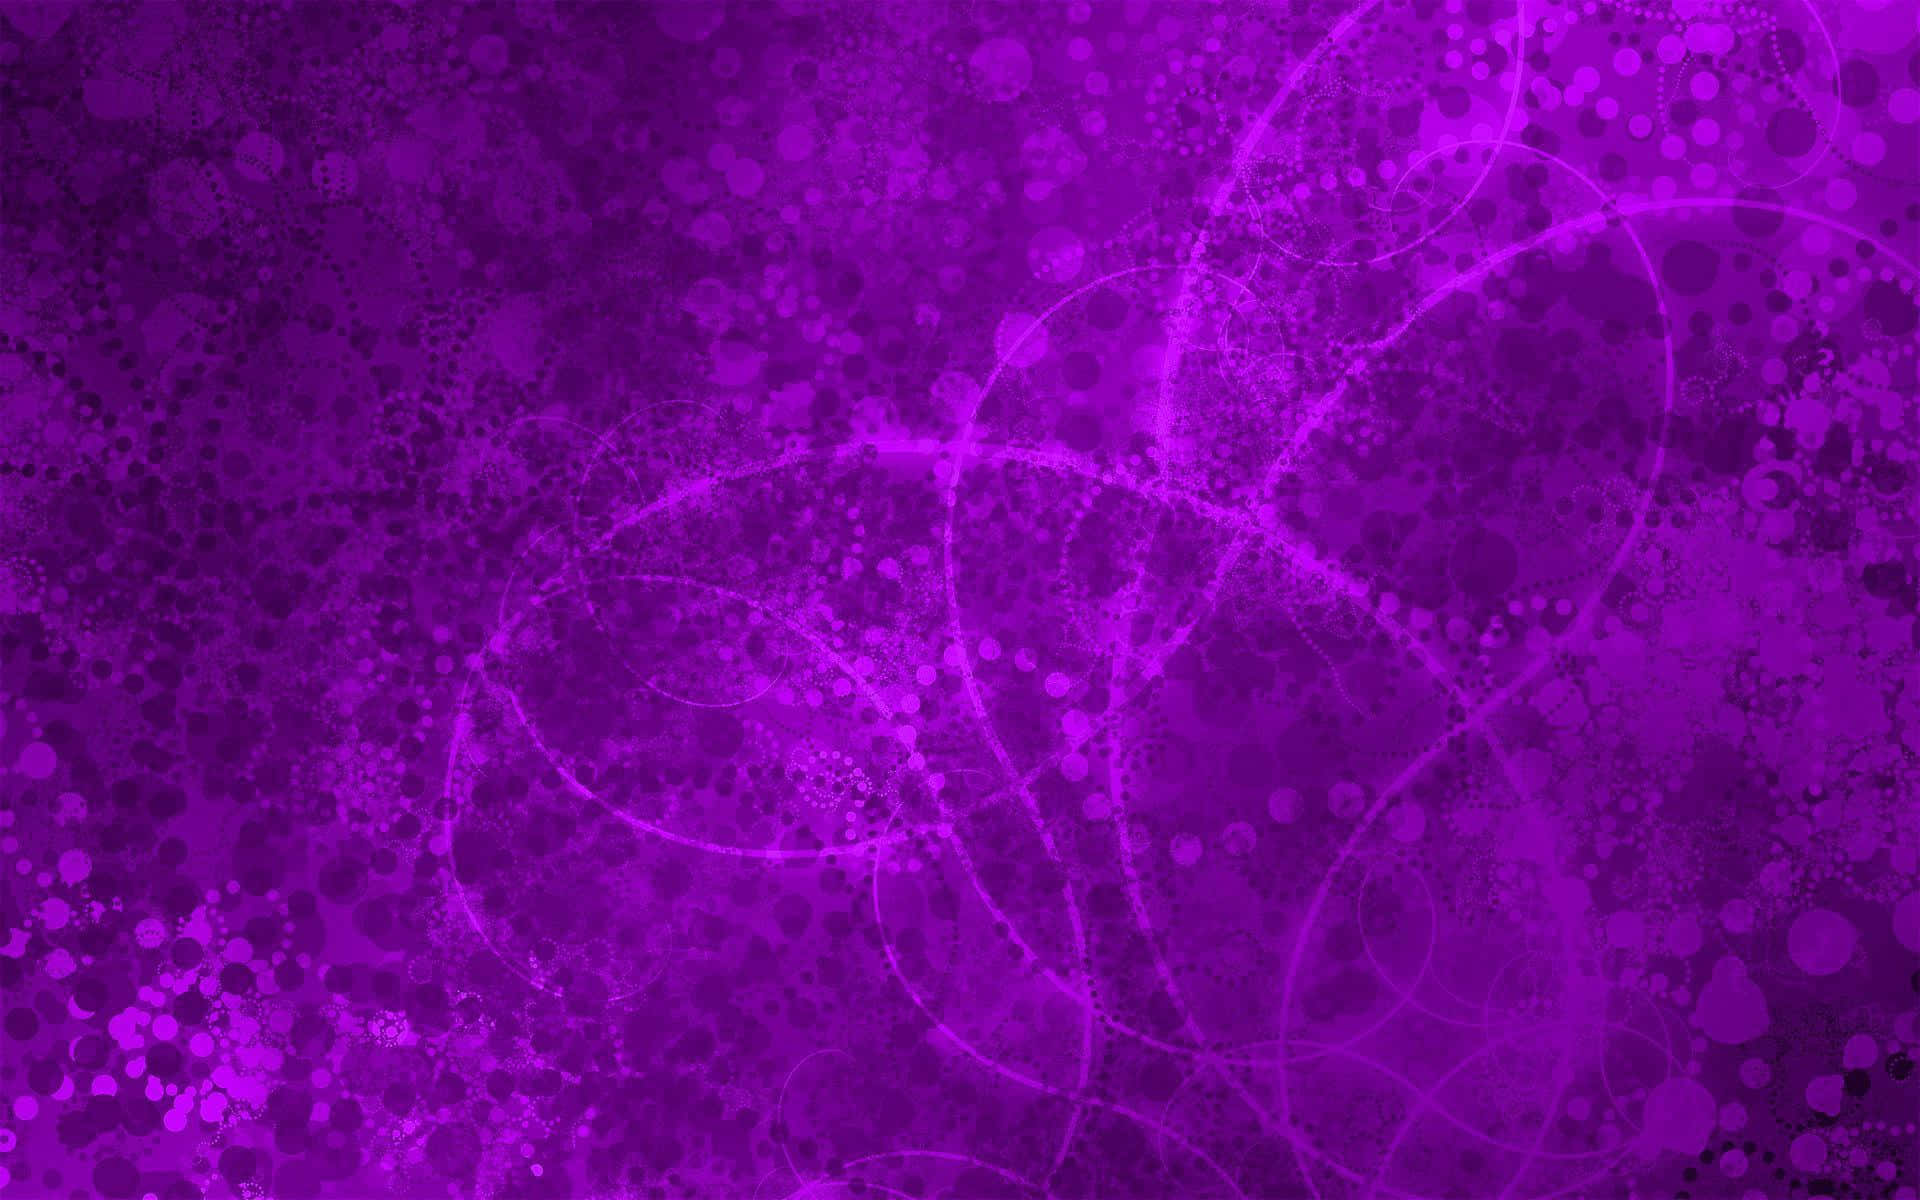 A vibrant and colorful purple abstract background